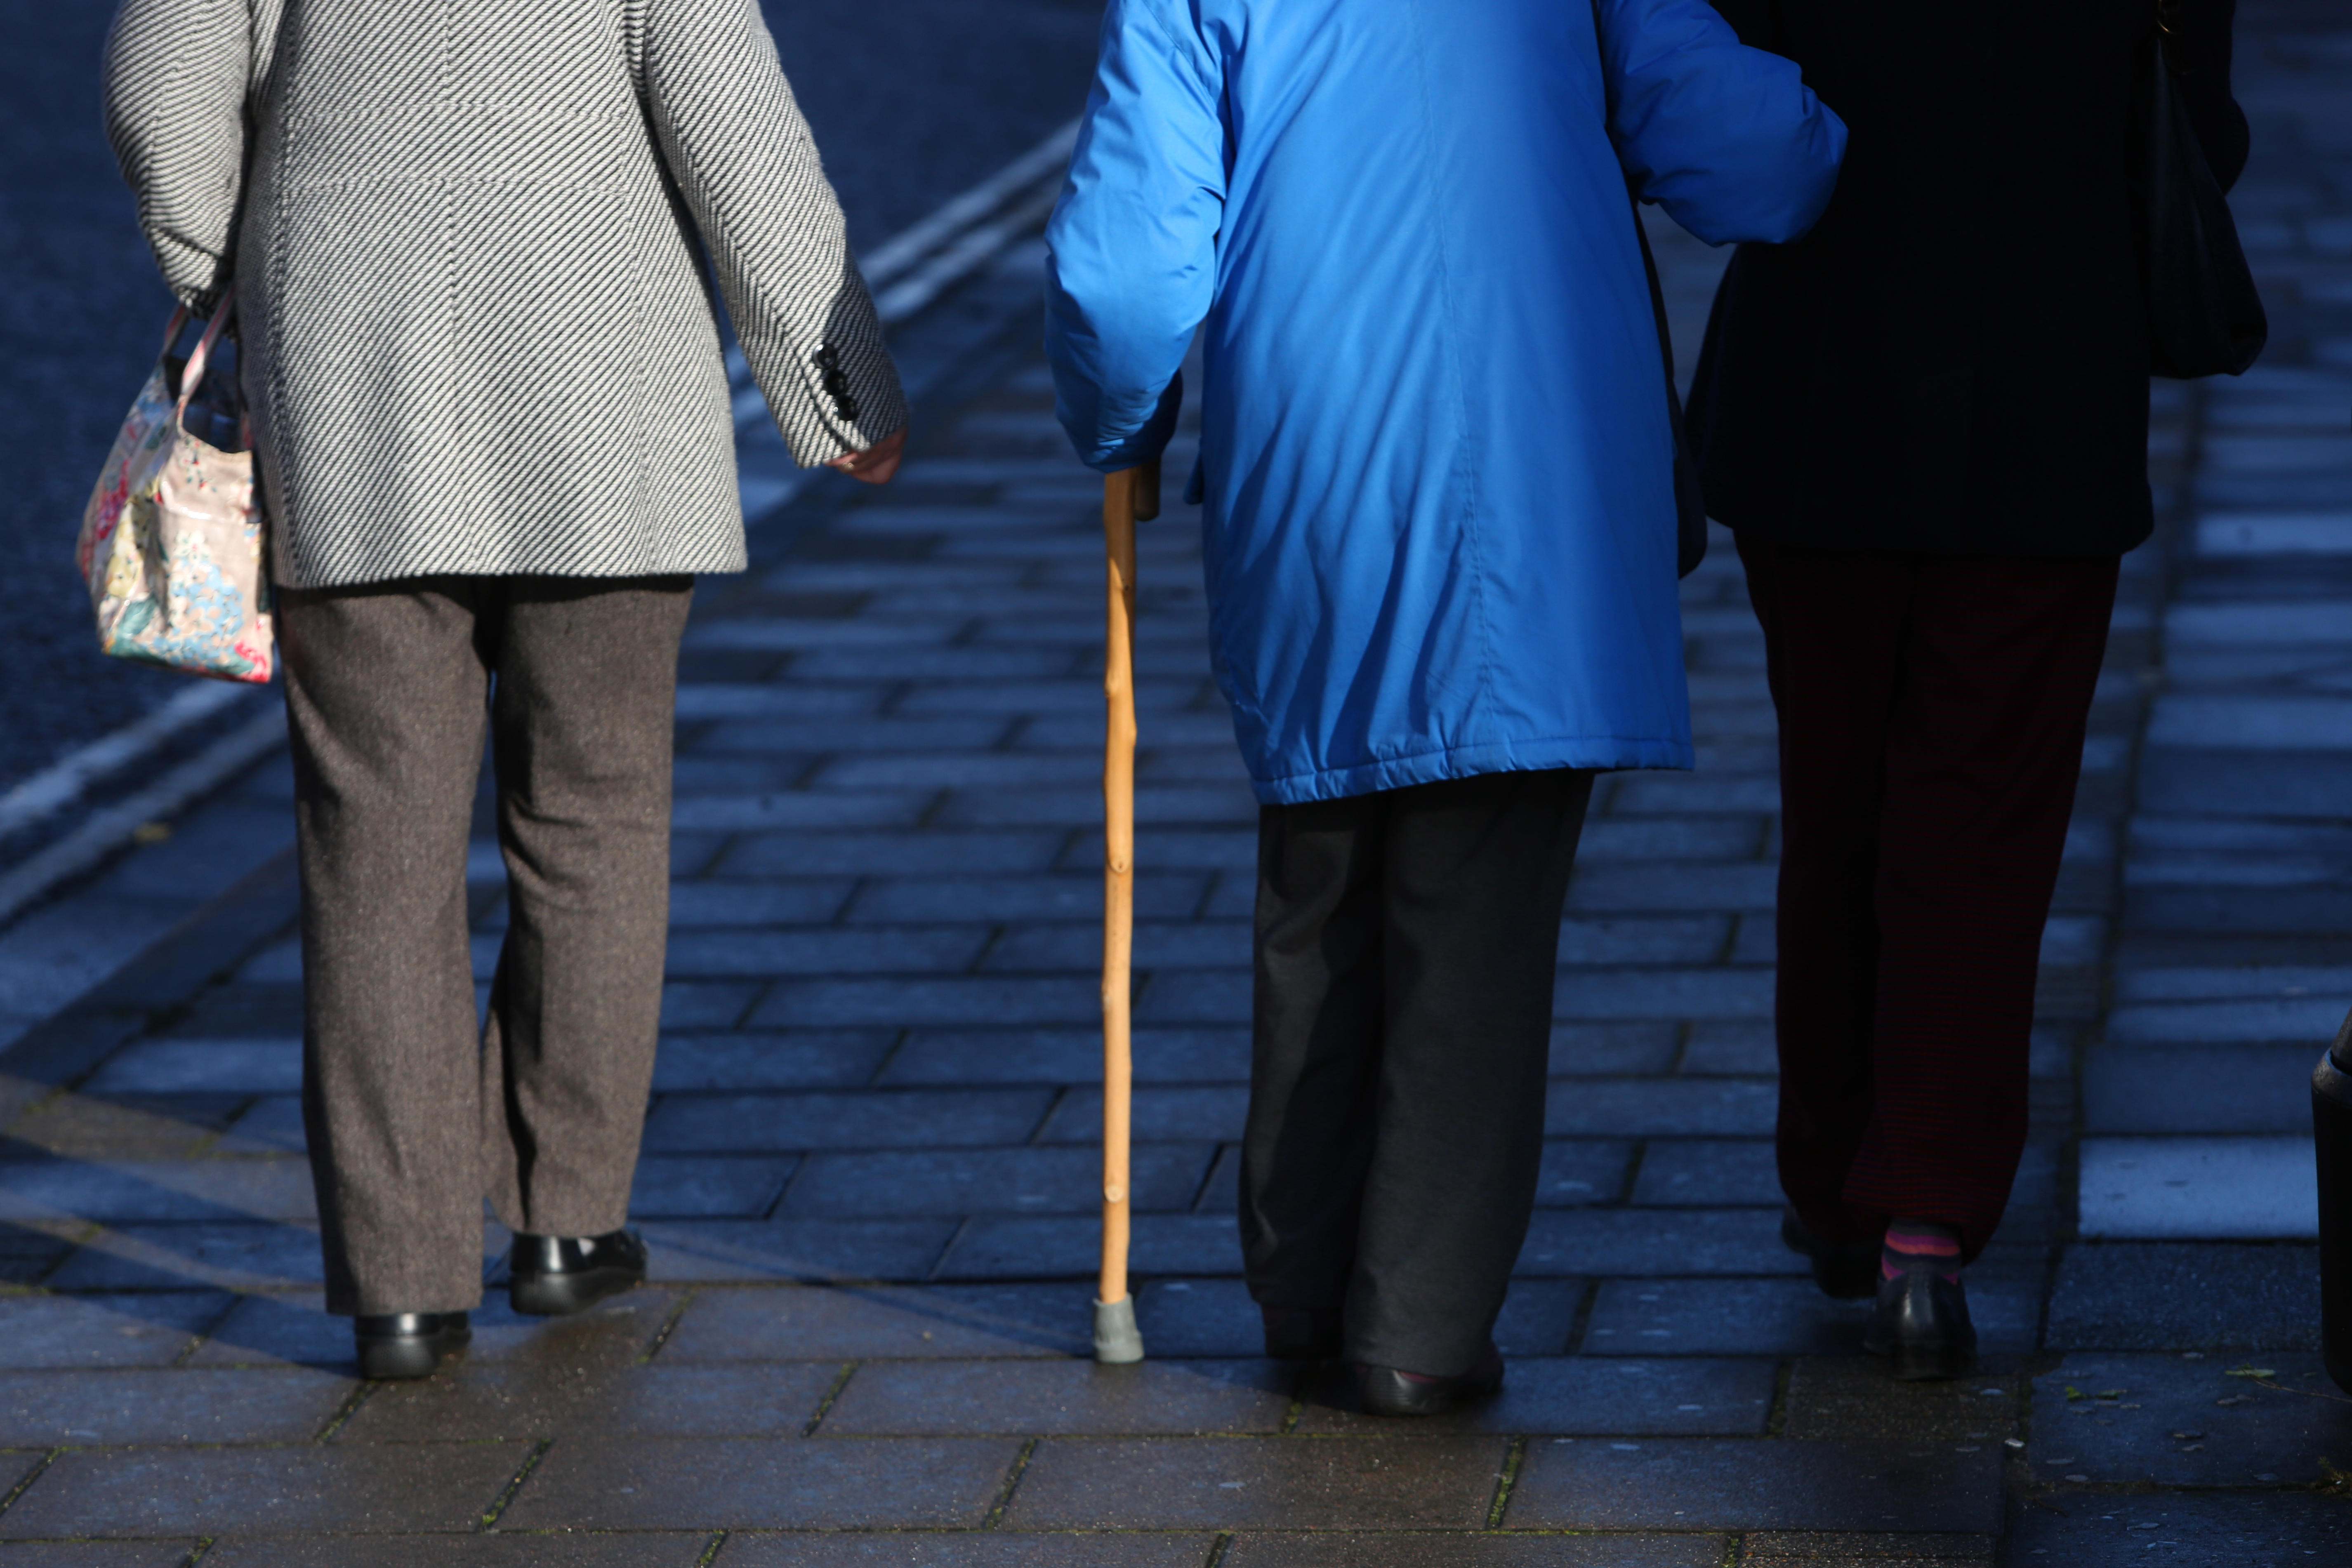 Three older women pictured walking along the street in Sussex, UK